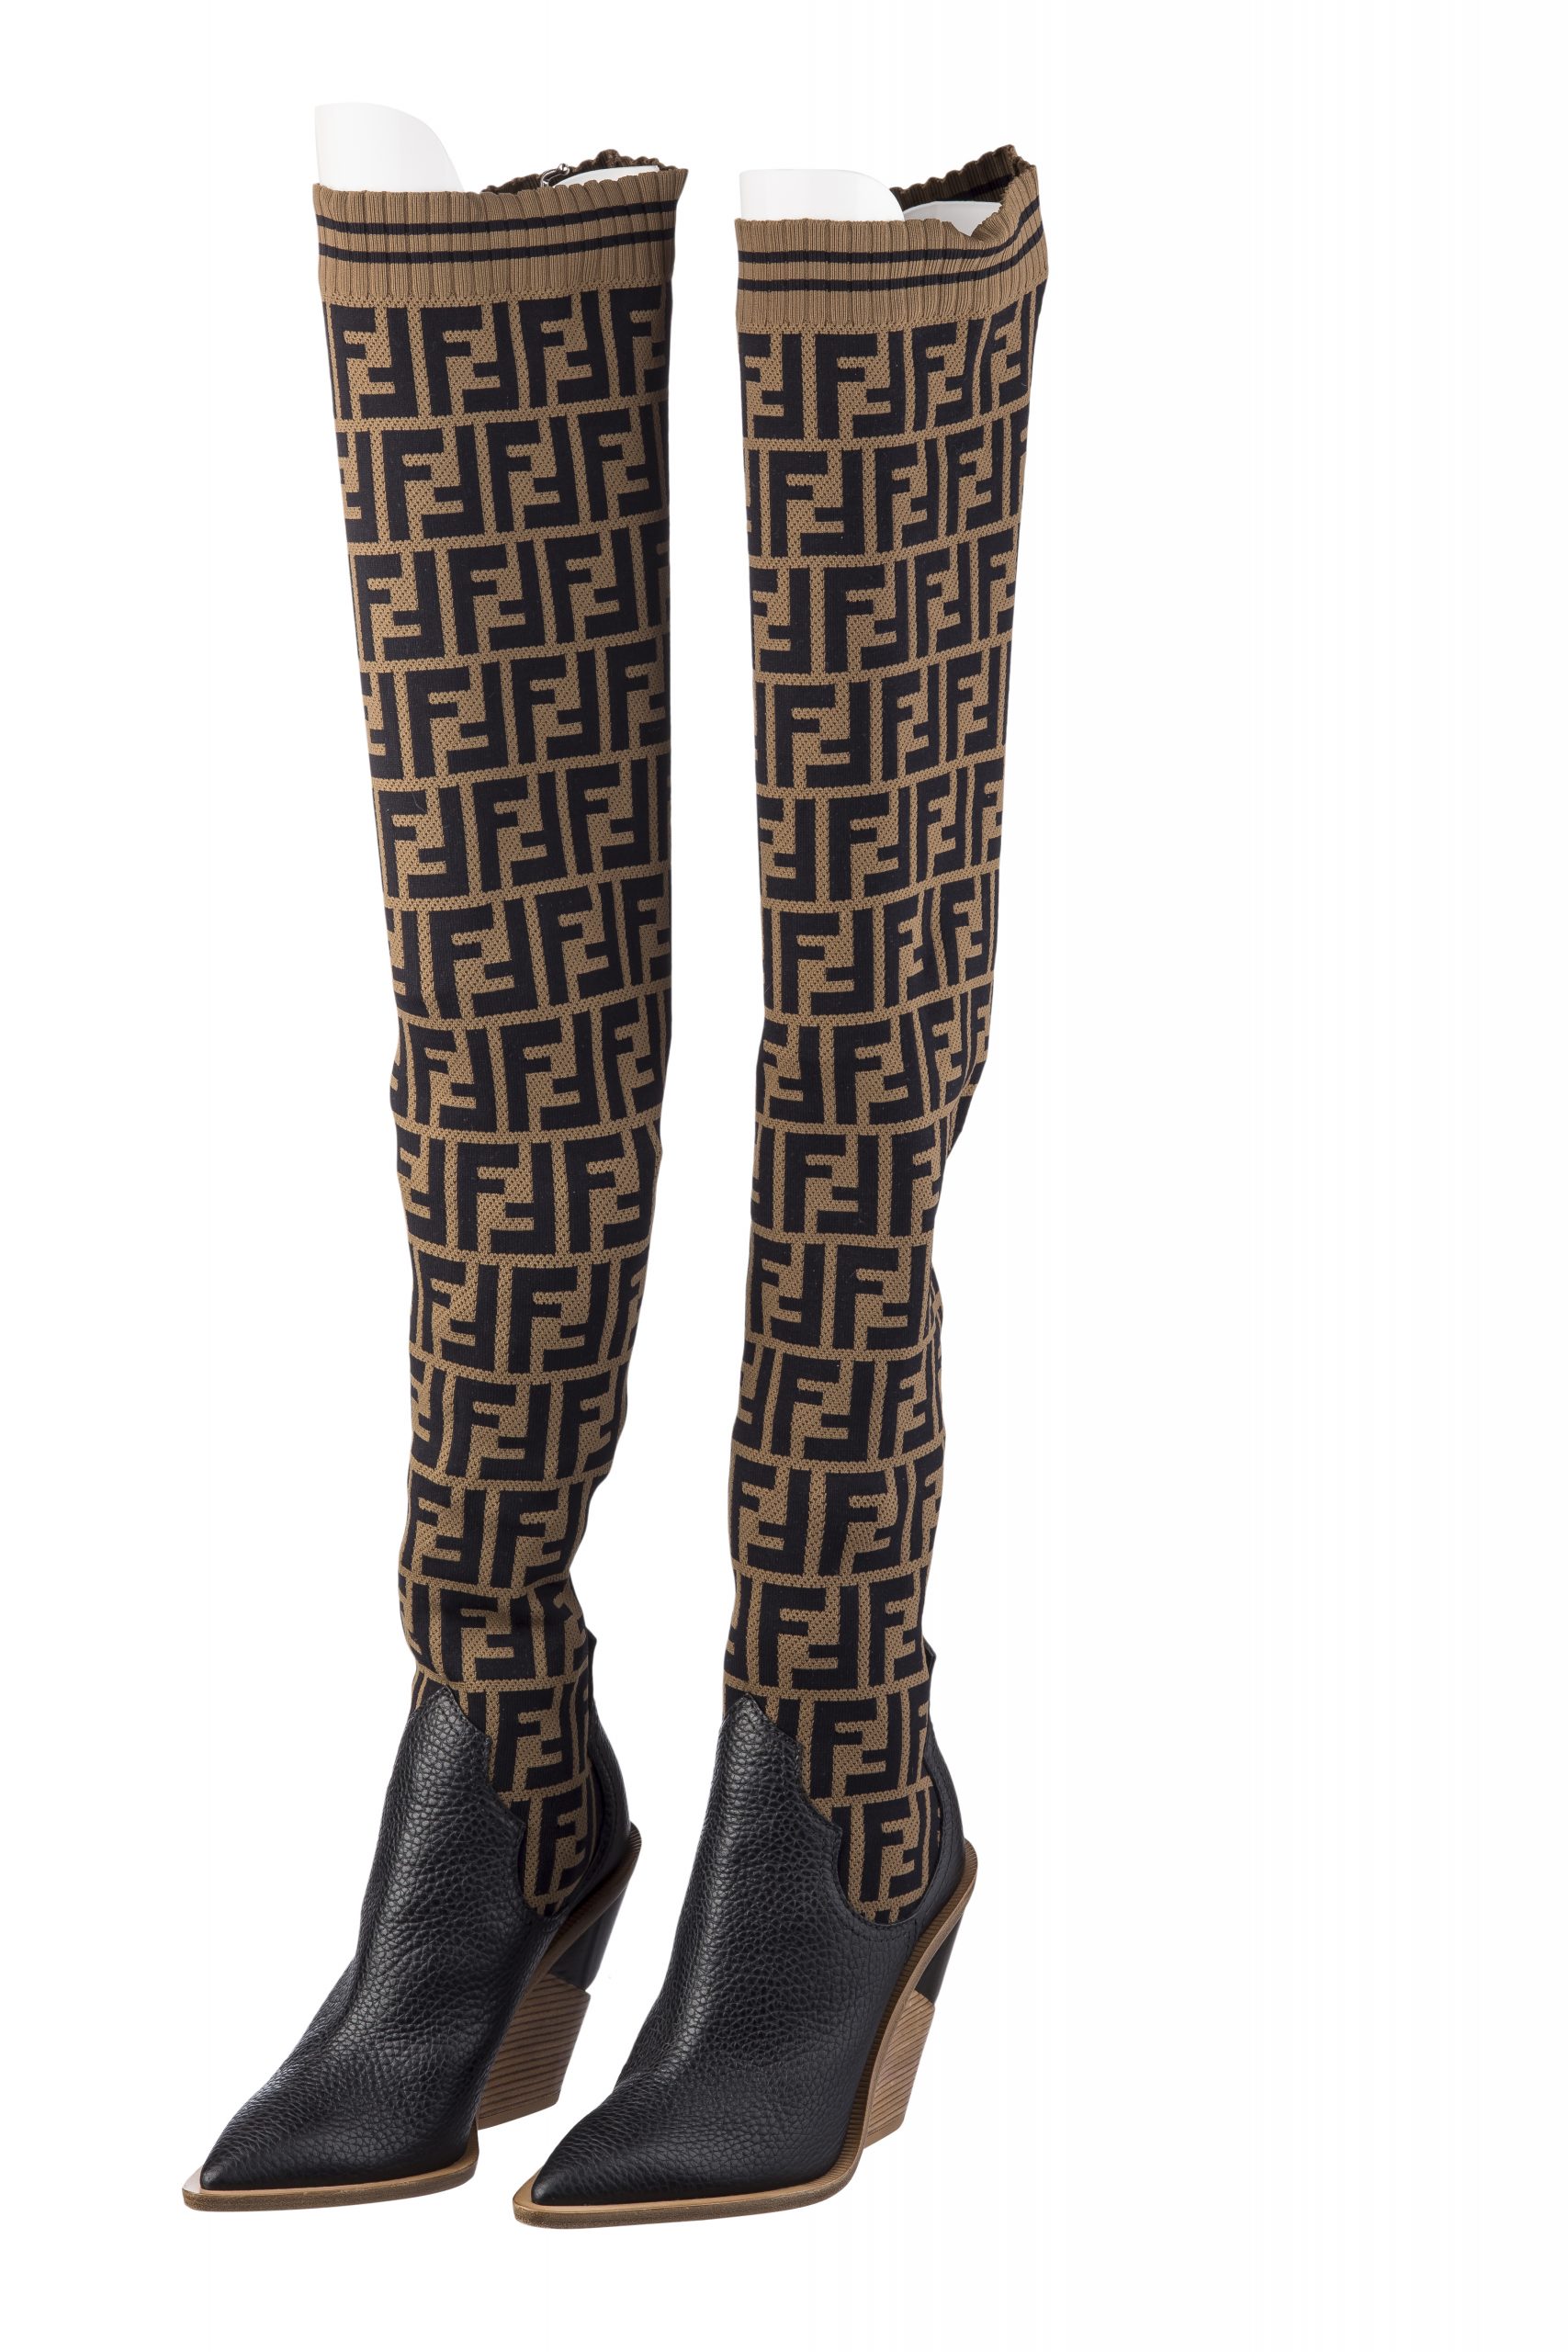 Fendi Knit Over The Knee Boots - Janet 